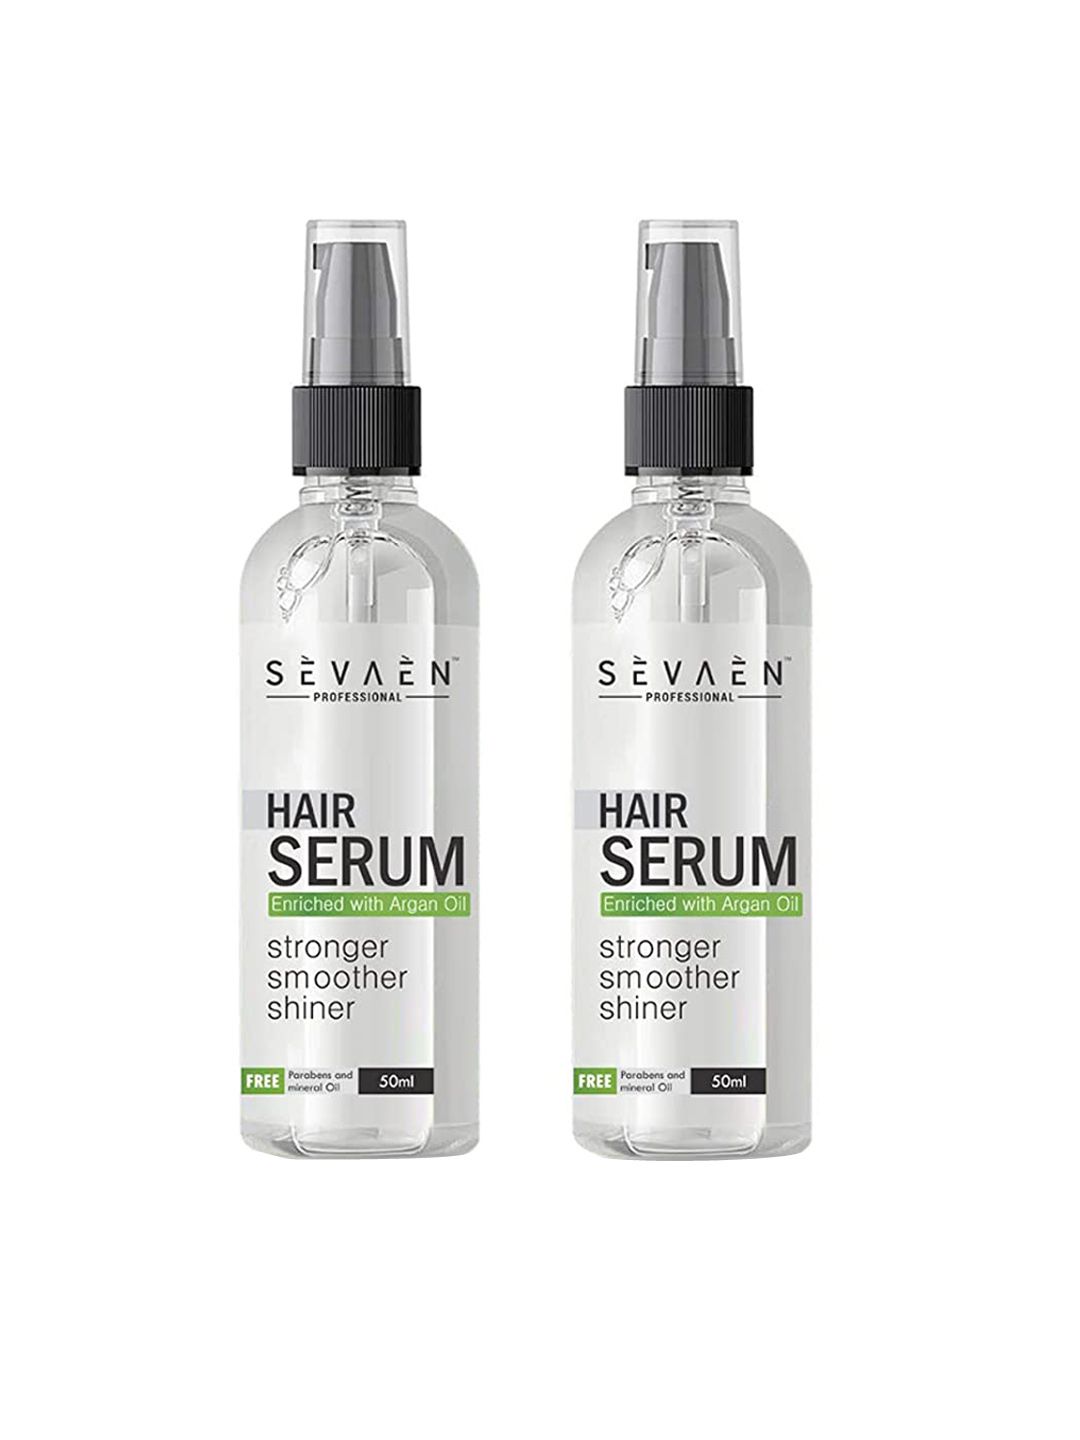 SEVAEN Set of 2 Hair Serums for Silky & Smooth Hair with Almond and Argan Oil - 50ml each Price in India